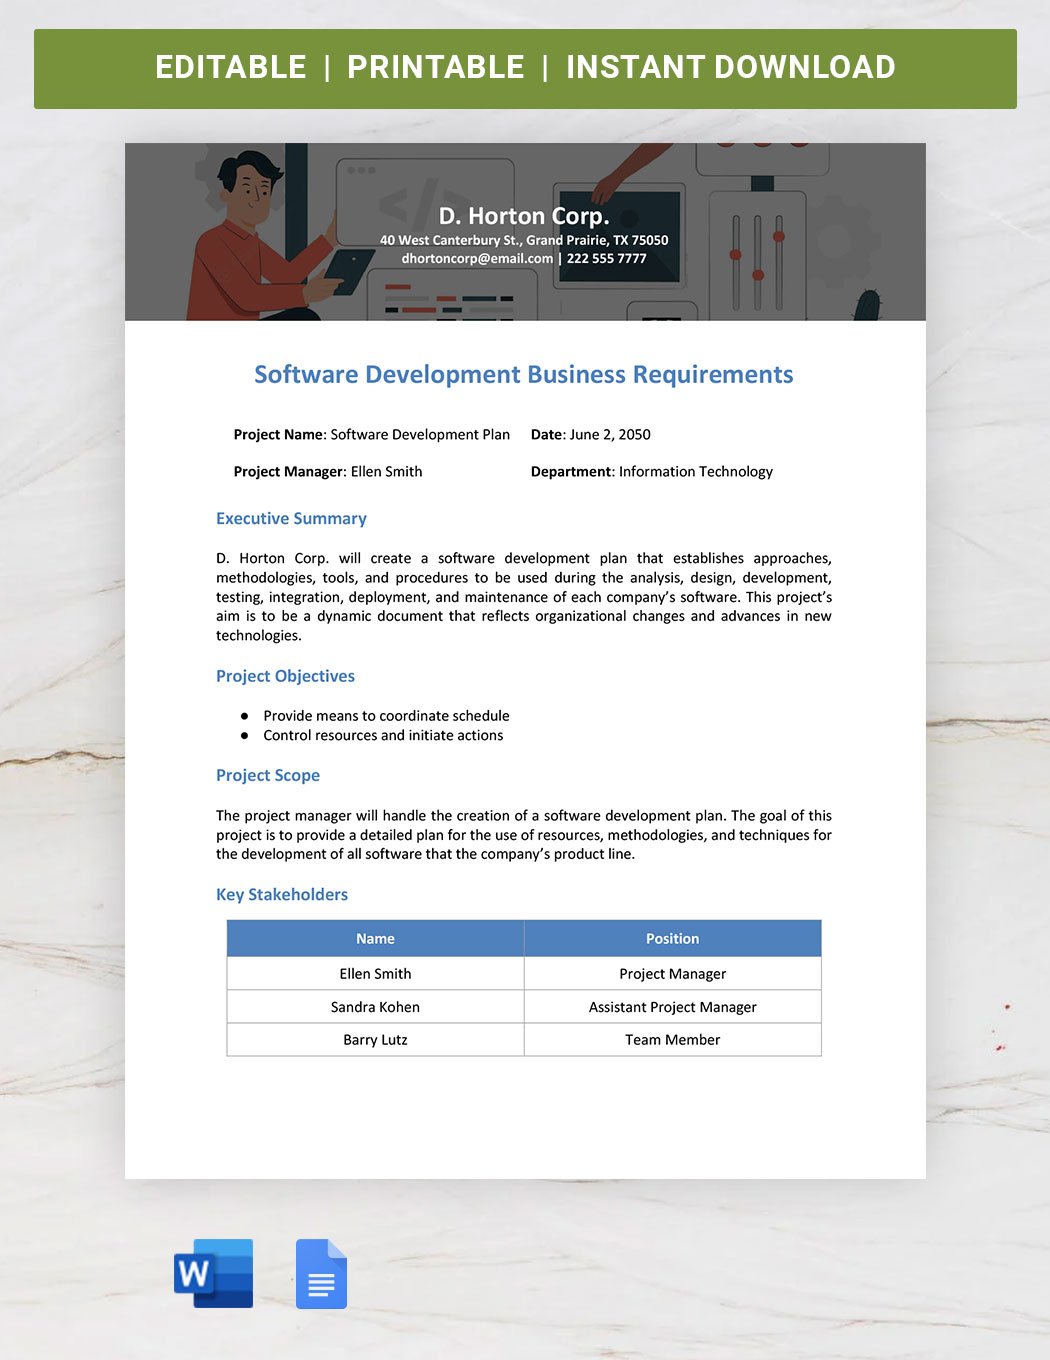 Software Development Business Requirements Template in Word, Google Docs